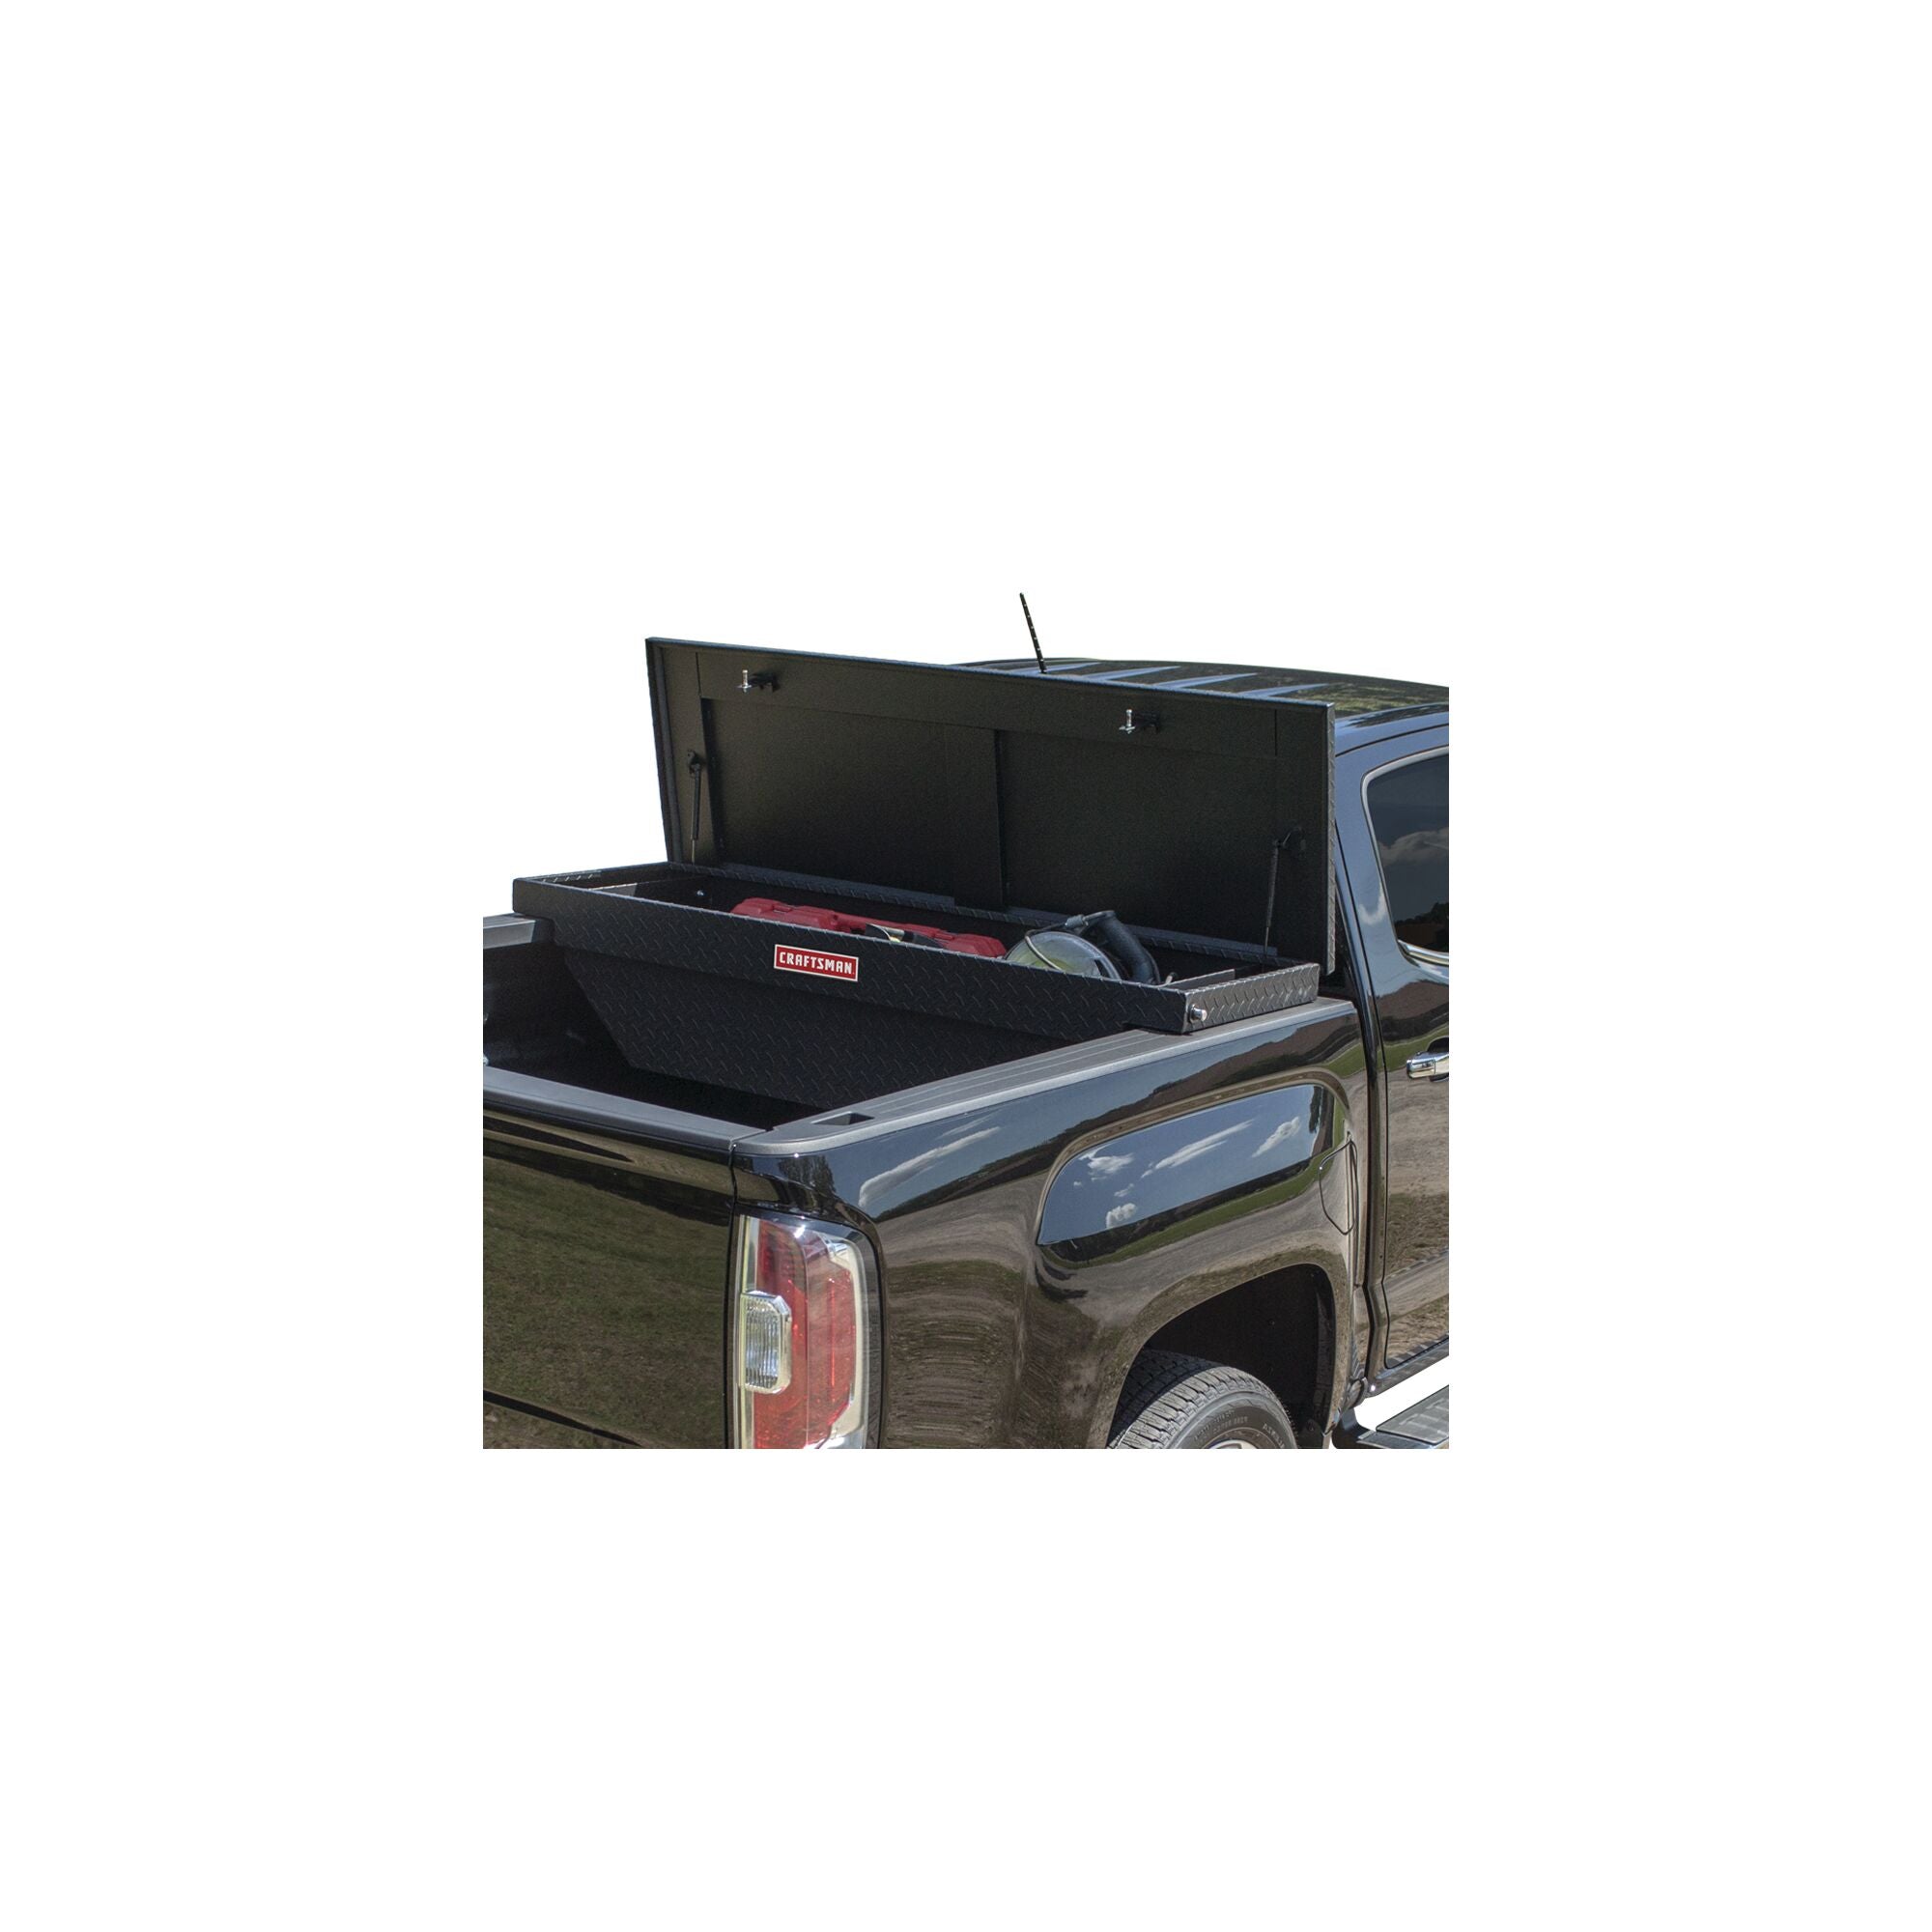 Aluminum 60 Inch Side Mount Tool Box Side Truck Box with Paddle